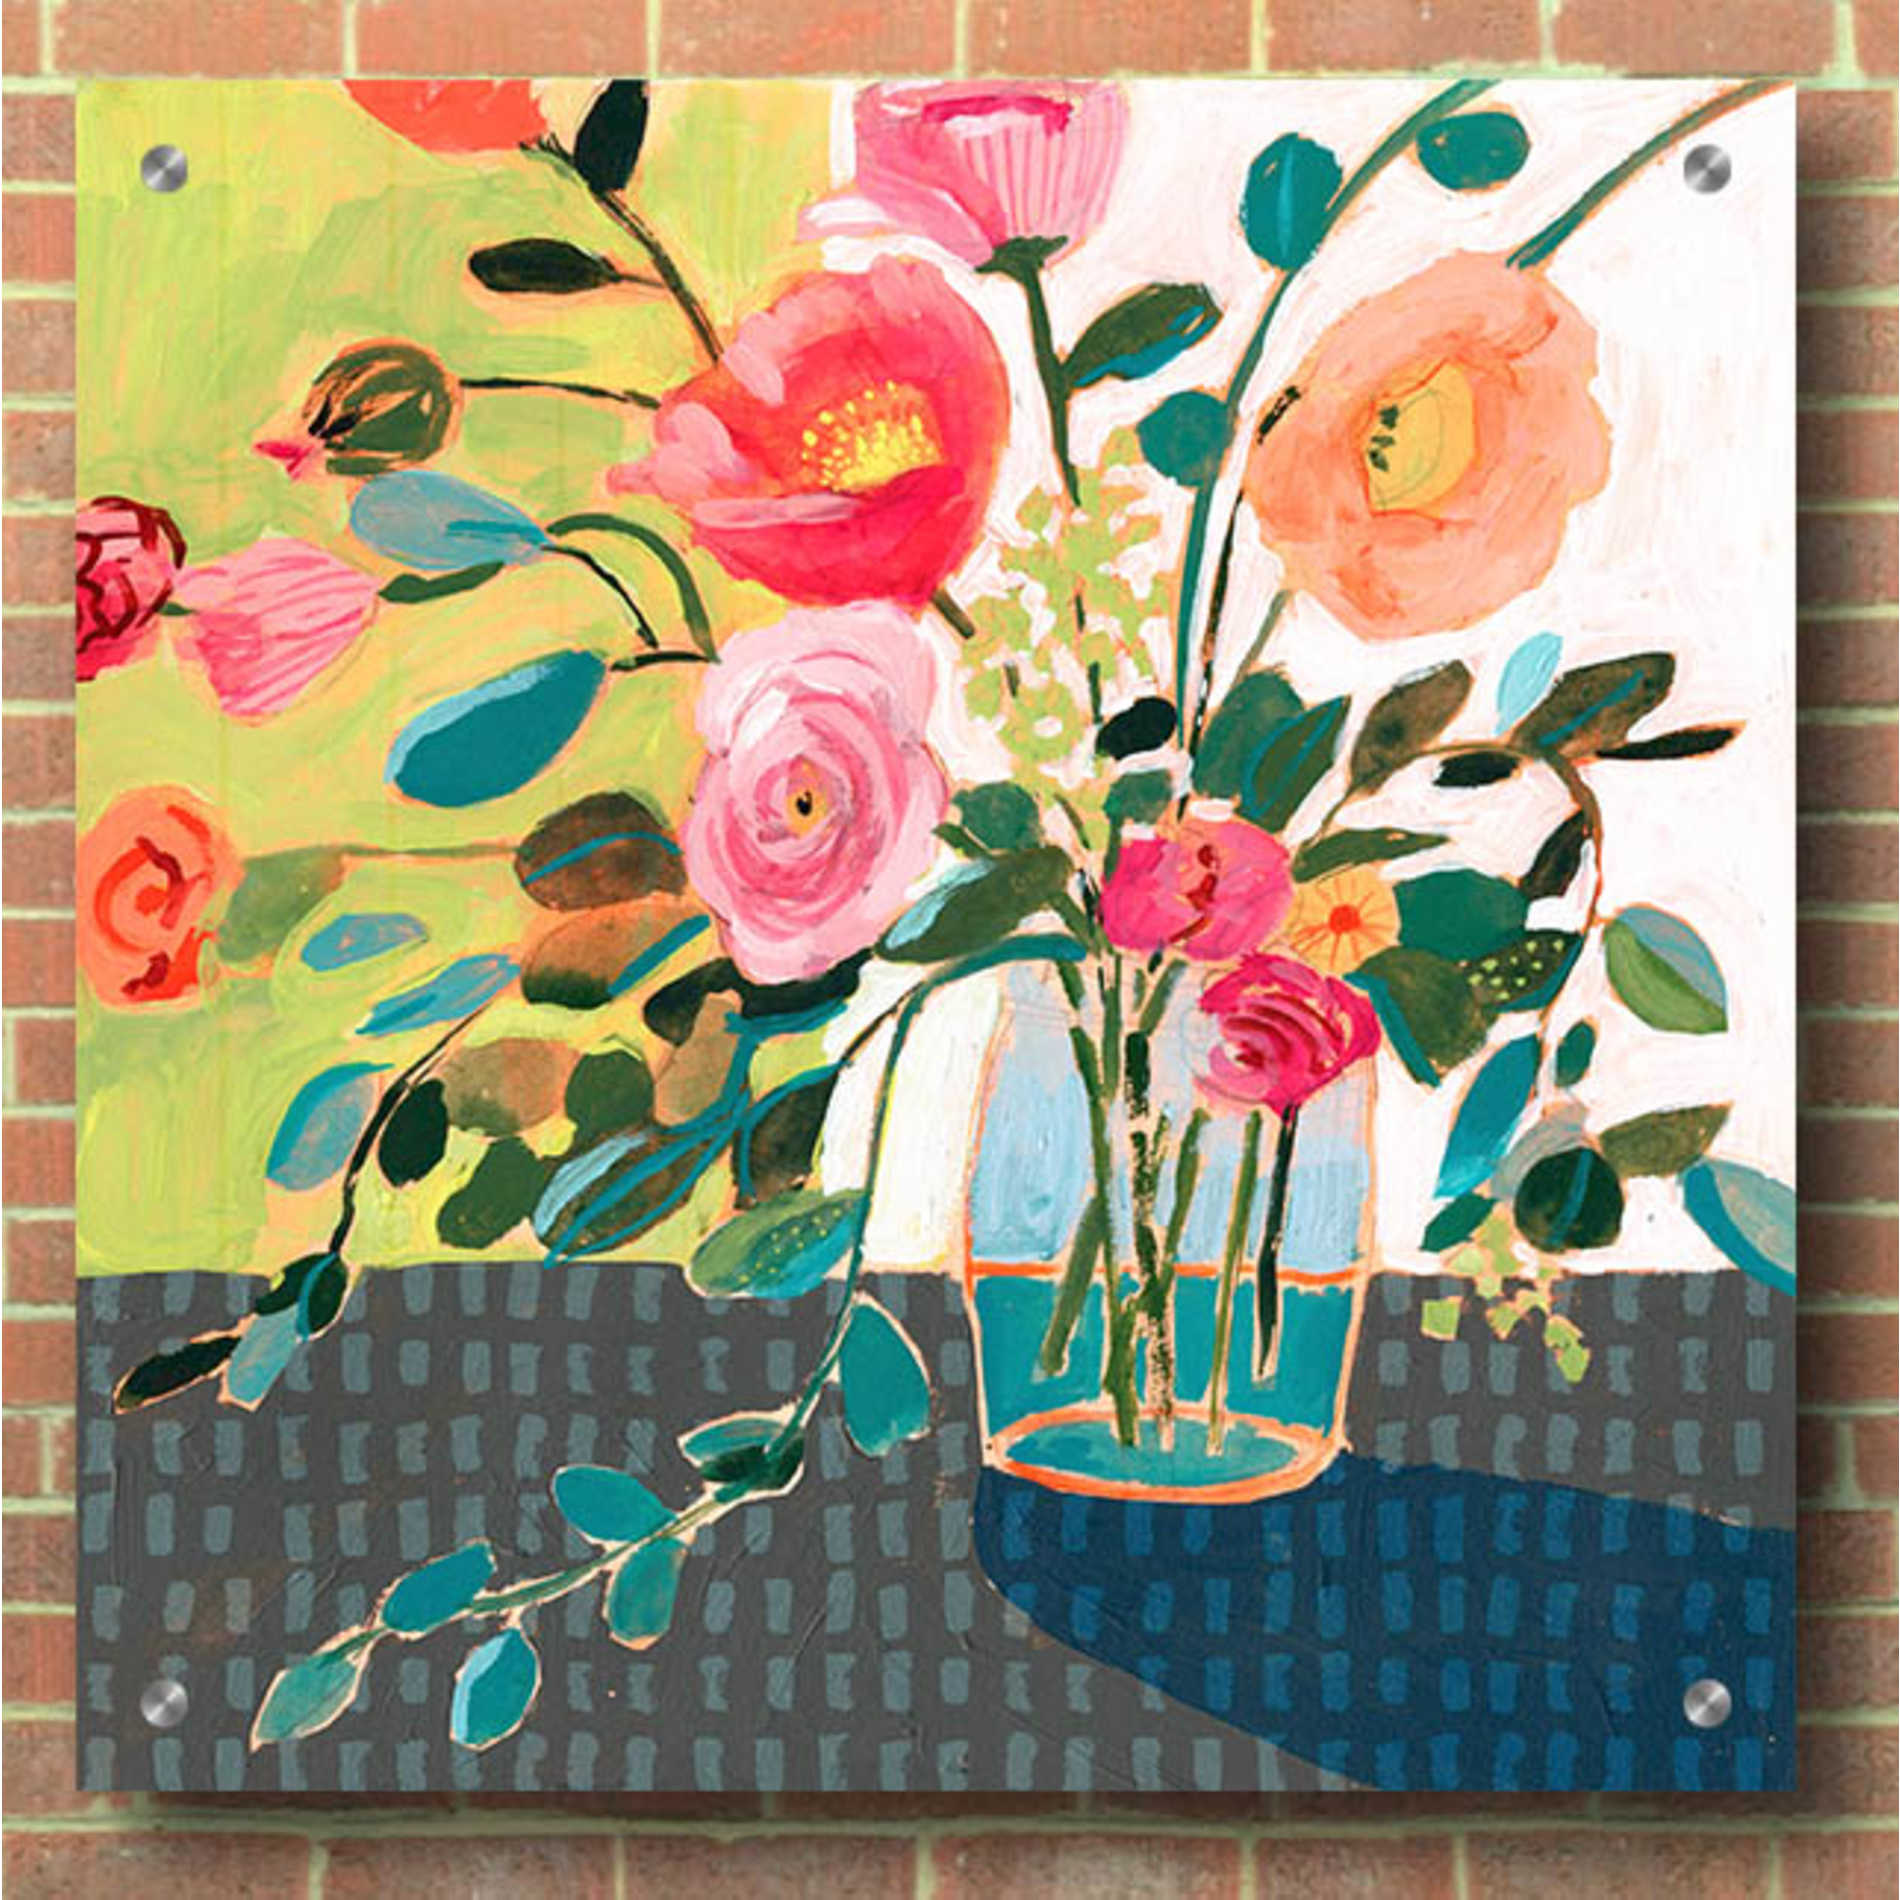 Epic Art 'Quirky Bouquet II' by Victoria Borges, Acrylic Wall Art,36x36